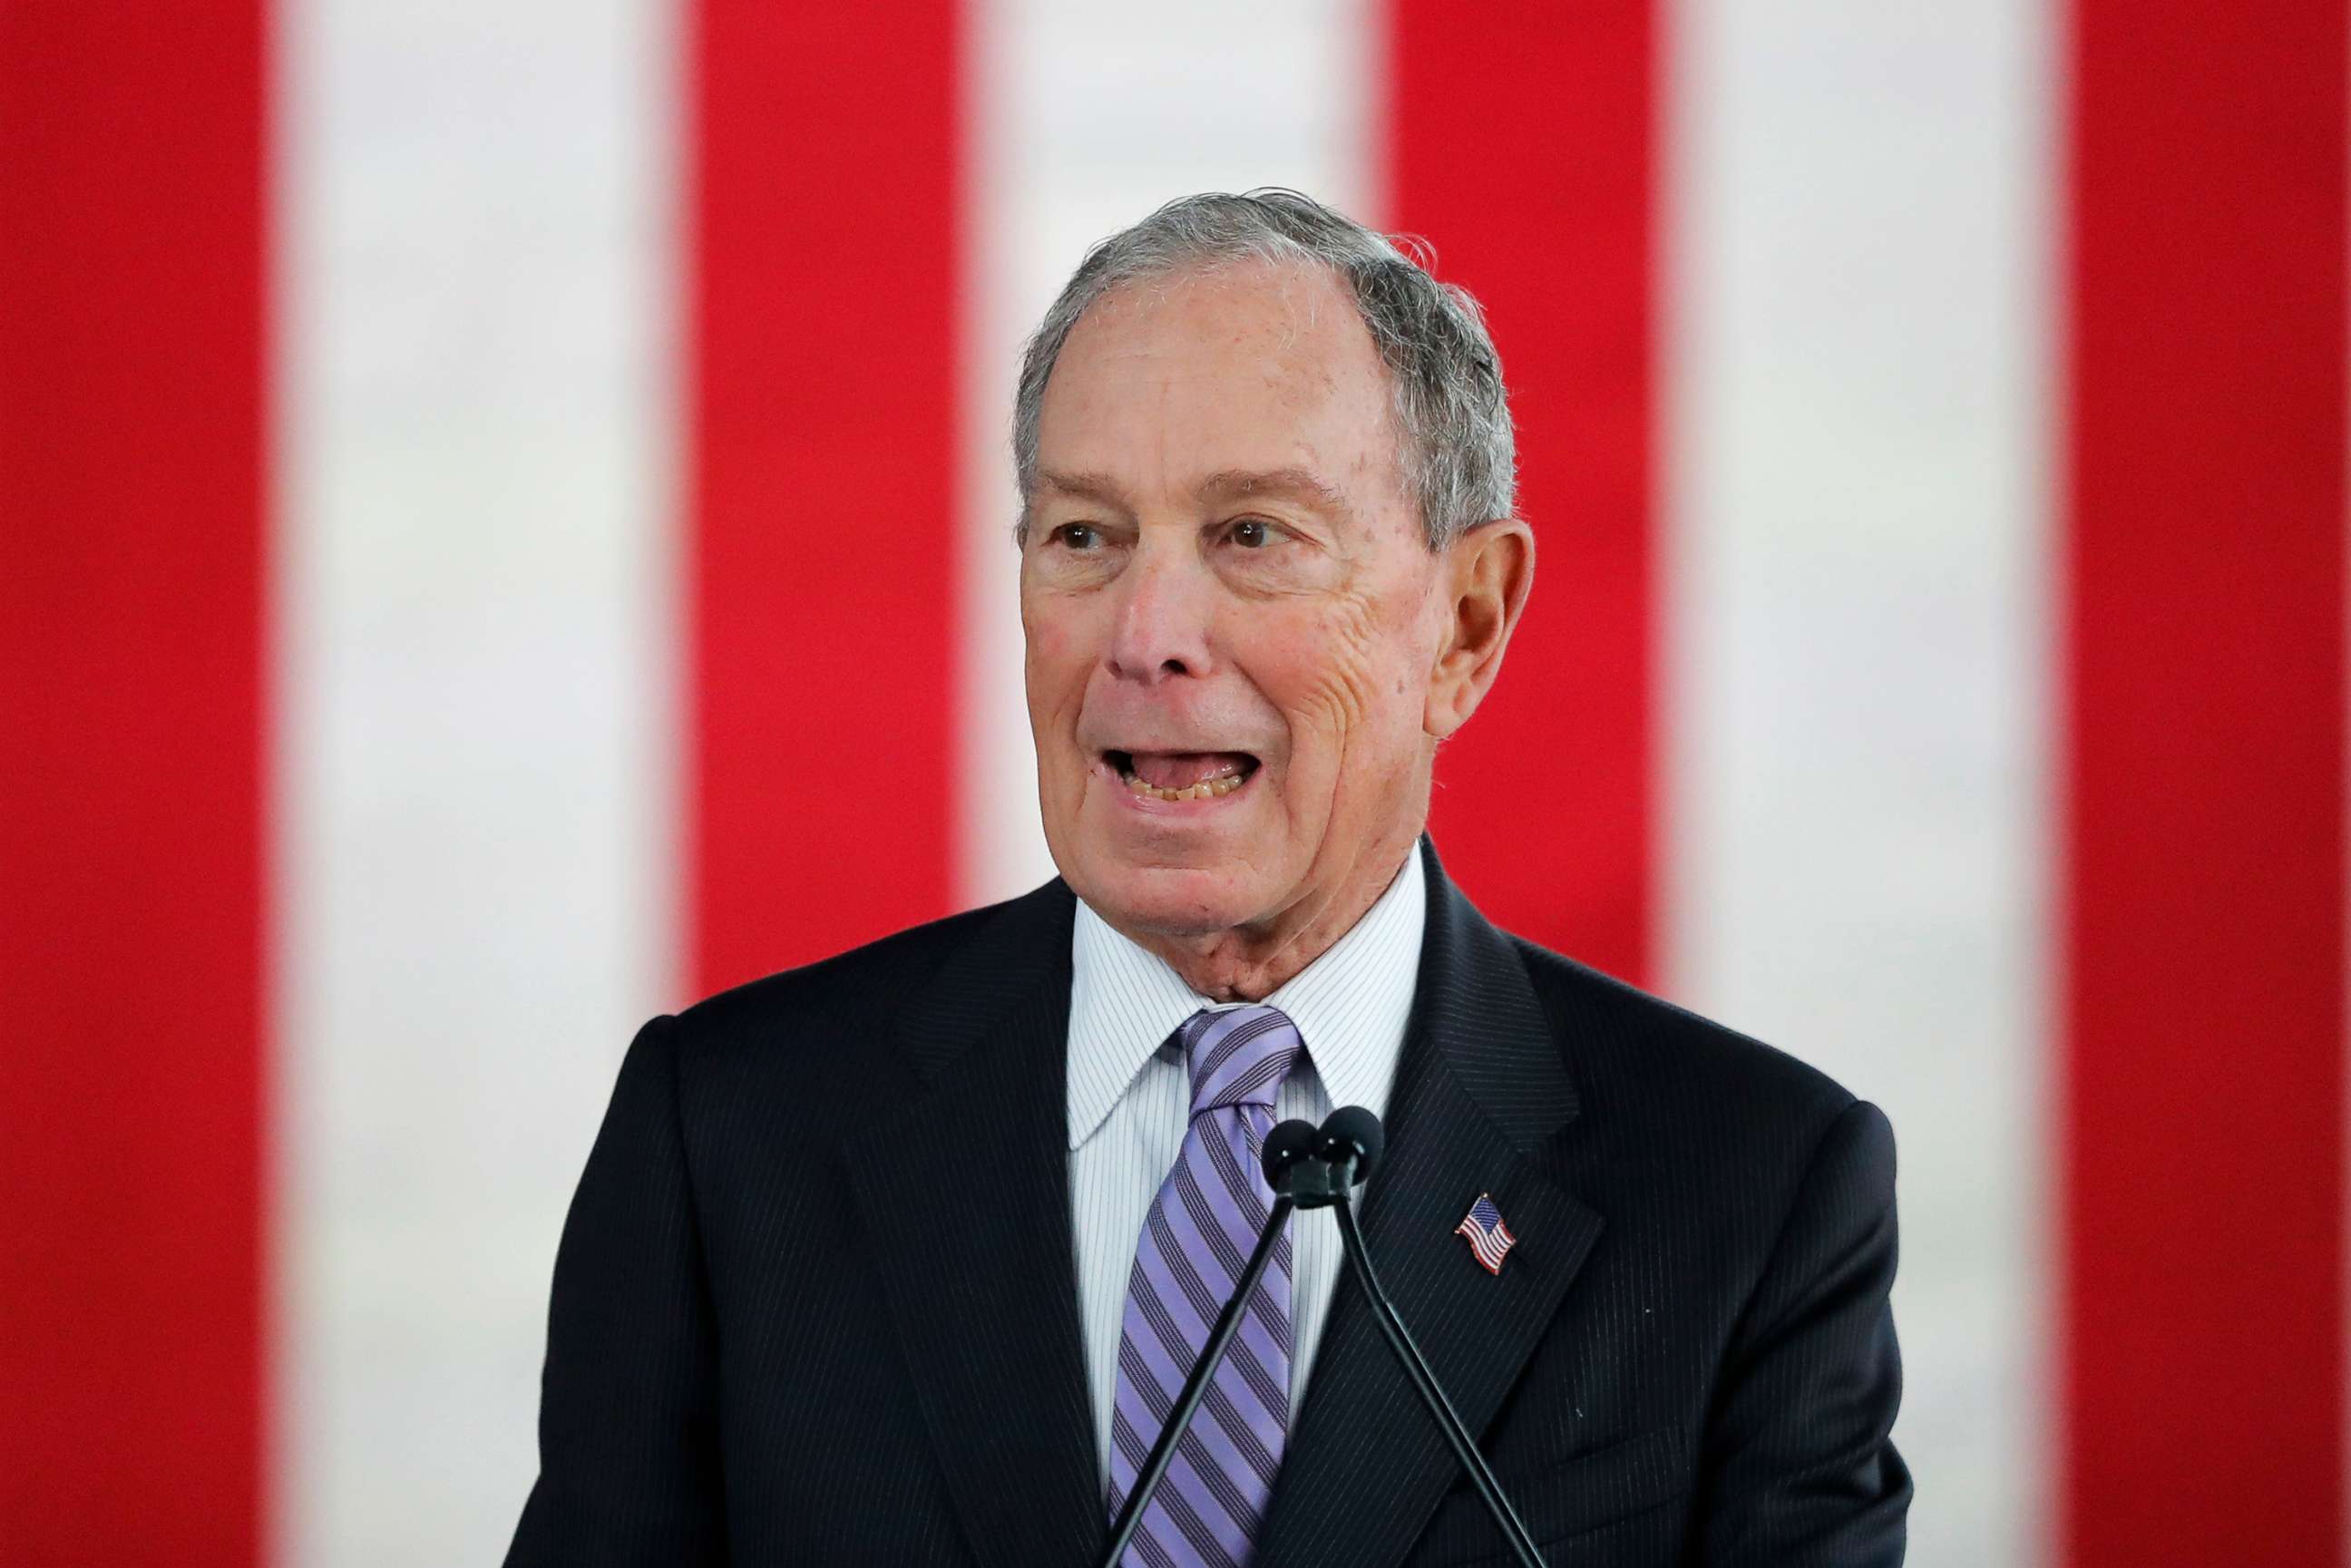 PHOTO: Democratic presidential candidate and former New York City Mayor Michael Bloomberg speaks at a campaign event in Raleigh, N.C., Feb. 13, 2020.